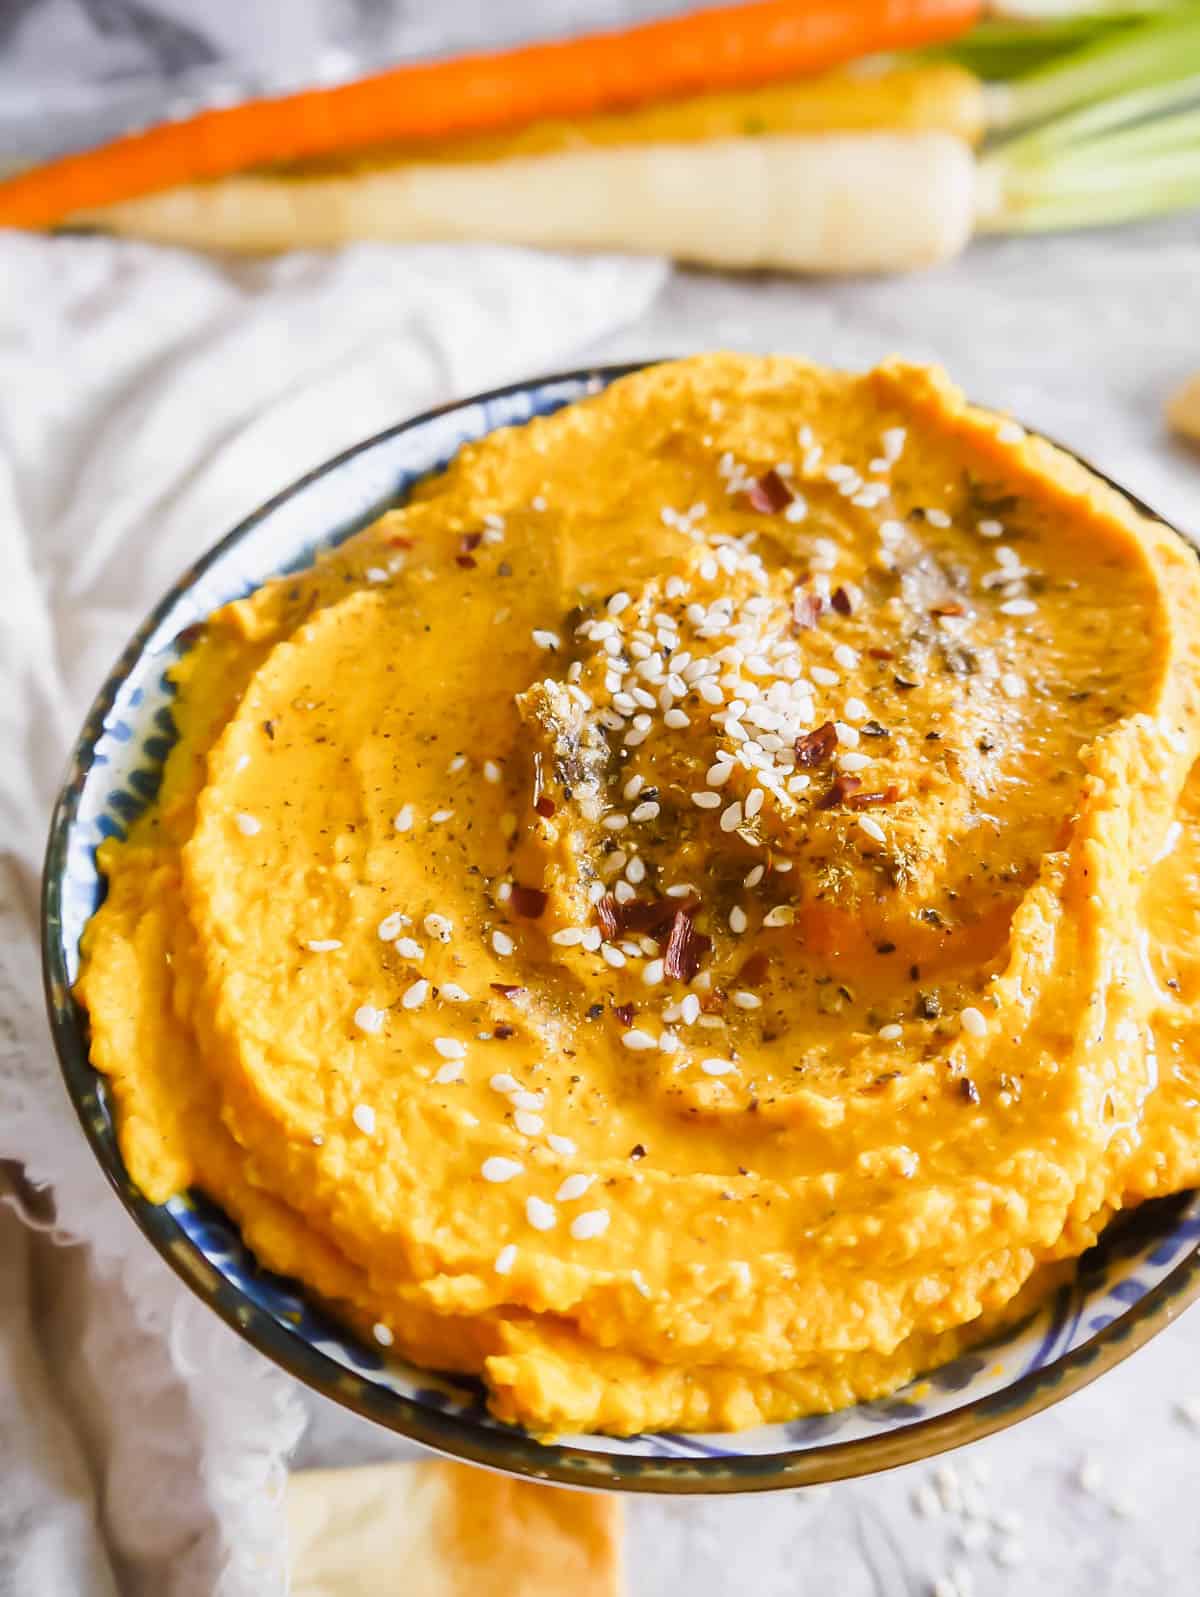 Up close side angle of roasted carrot hummus with sesame seeds, chili flakes and za'atar on top.